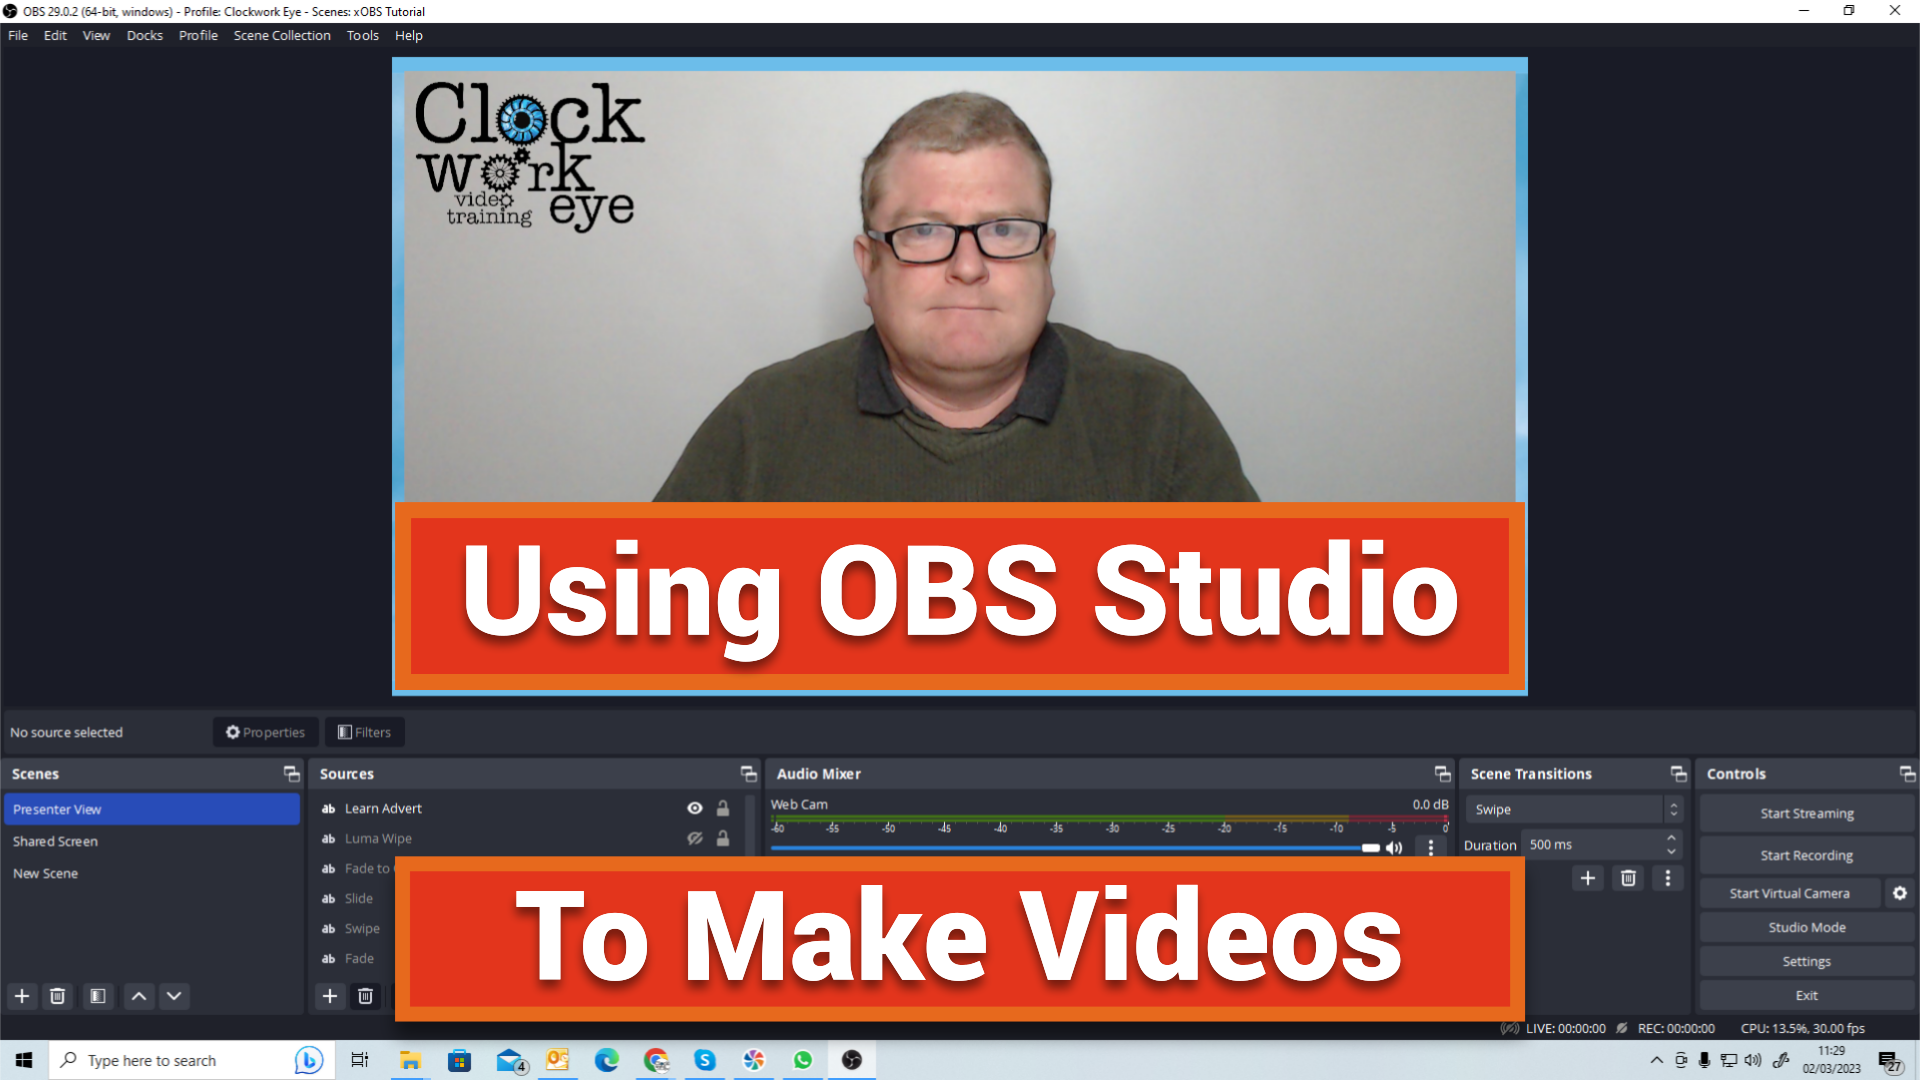 Create Videos With OBS Studio (Interactive Workshop)